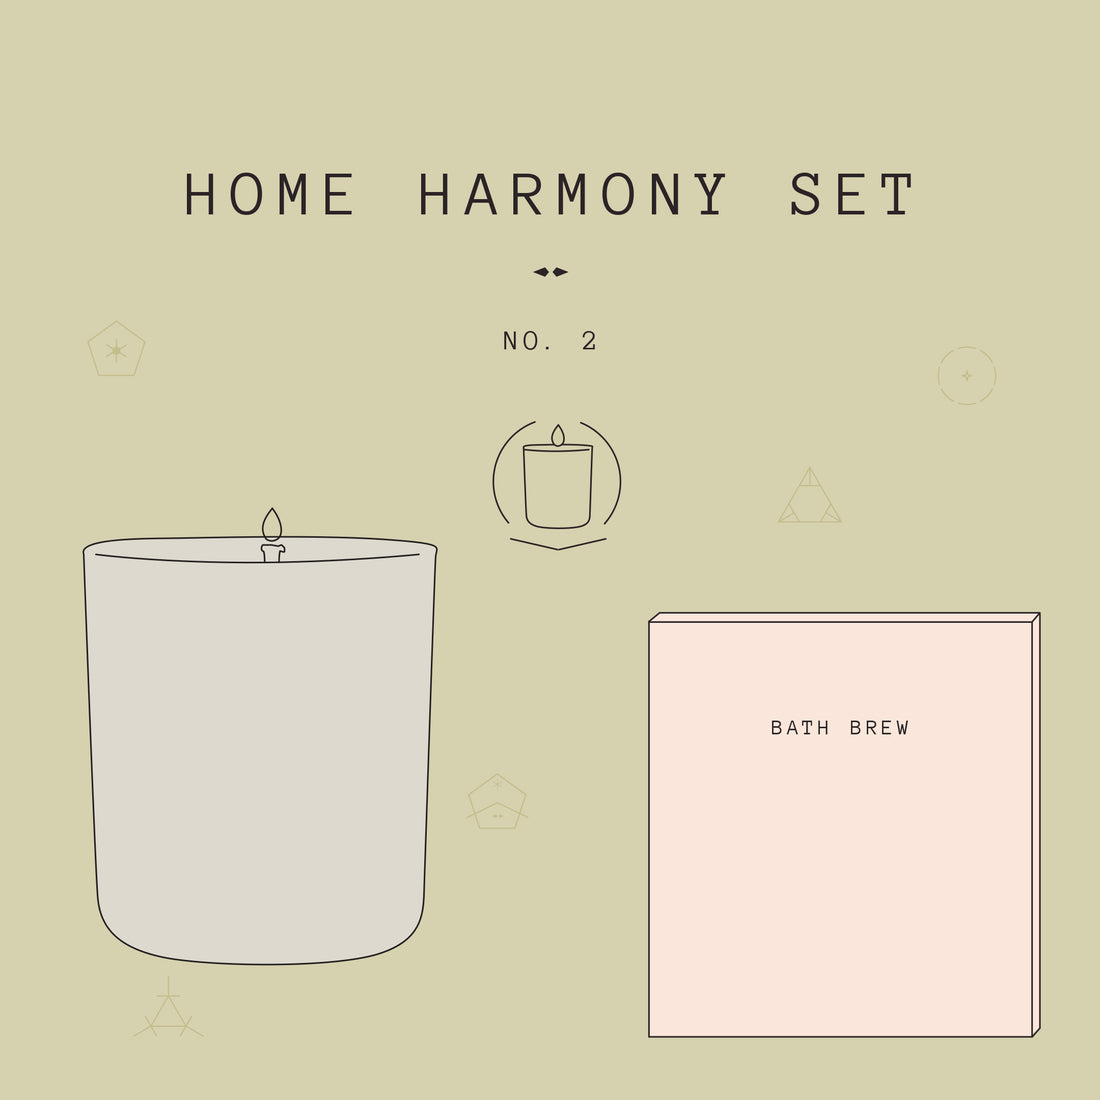  Home Harmony 2 Gift Set is designed to nurture your soul with a long bath soak and and the gentle flickering of candle light.  PRODUCTS INCLUDED: ・Addition Studio Riverstone Bath Brew, 55gm ・Addition Studio Sunflower Galaxy Scented Candle, 285gm